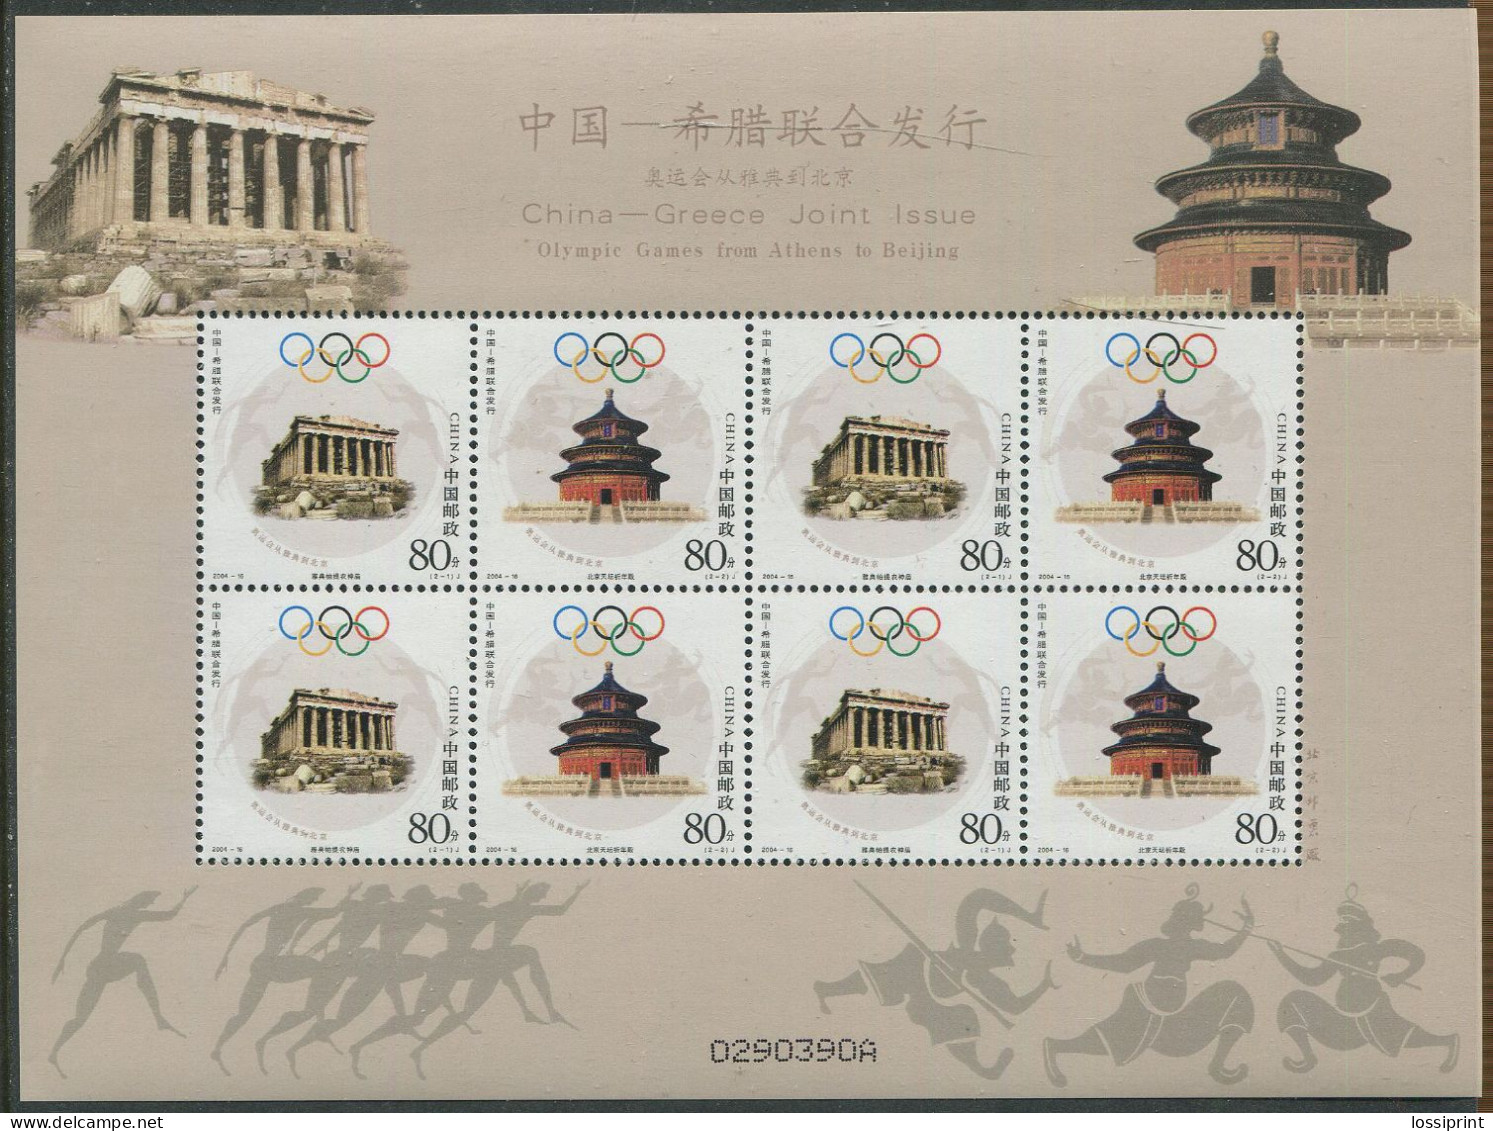 China:Greece:Unused Block Athens And Beijing Olympic Games, Joint Issue, 2004, MNH - Summer 2004: Athens